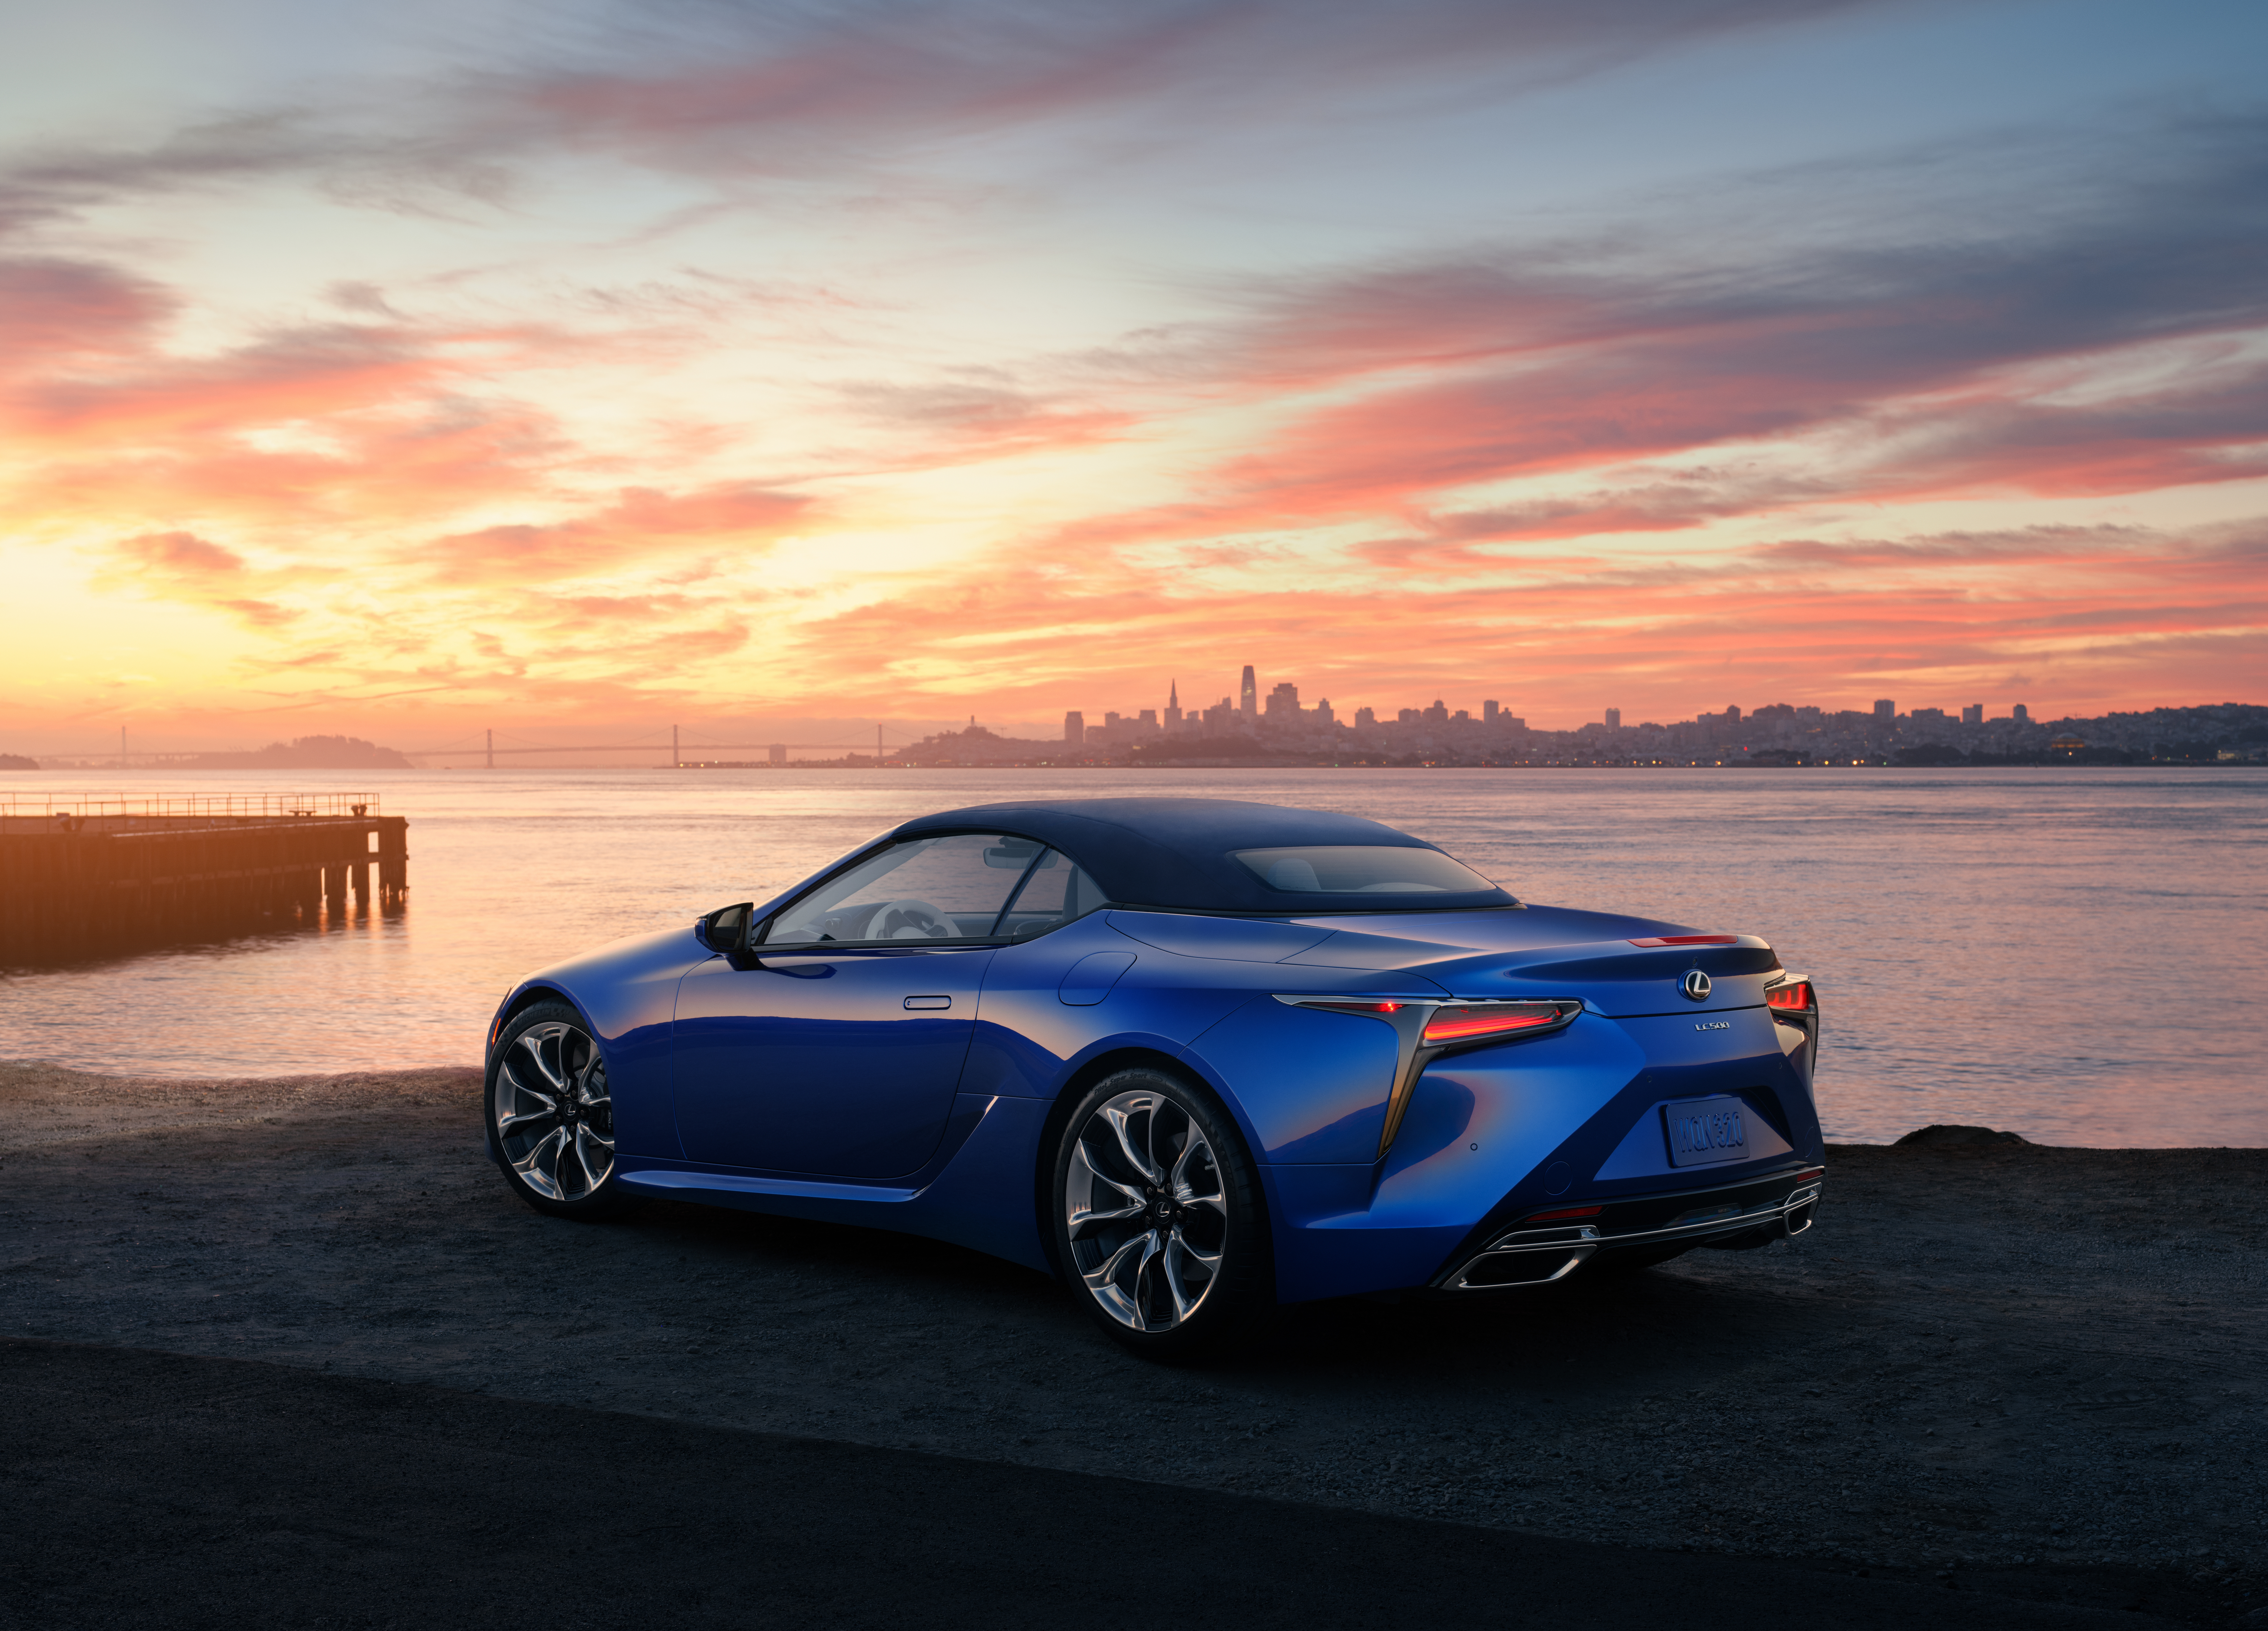 19 BMW Lexus lc 500 city wallpaper there are particular  from 2006-2021 